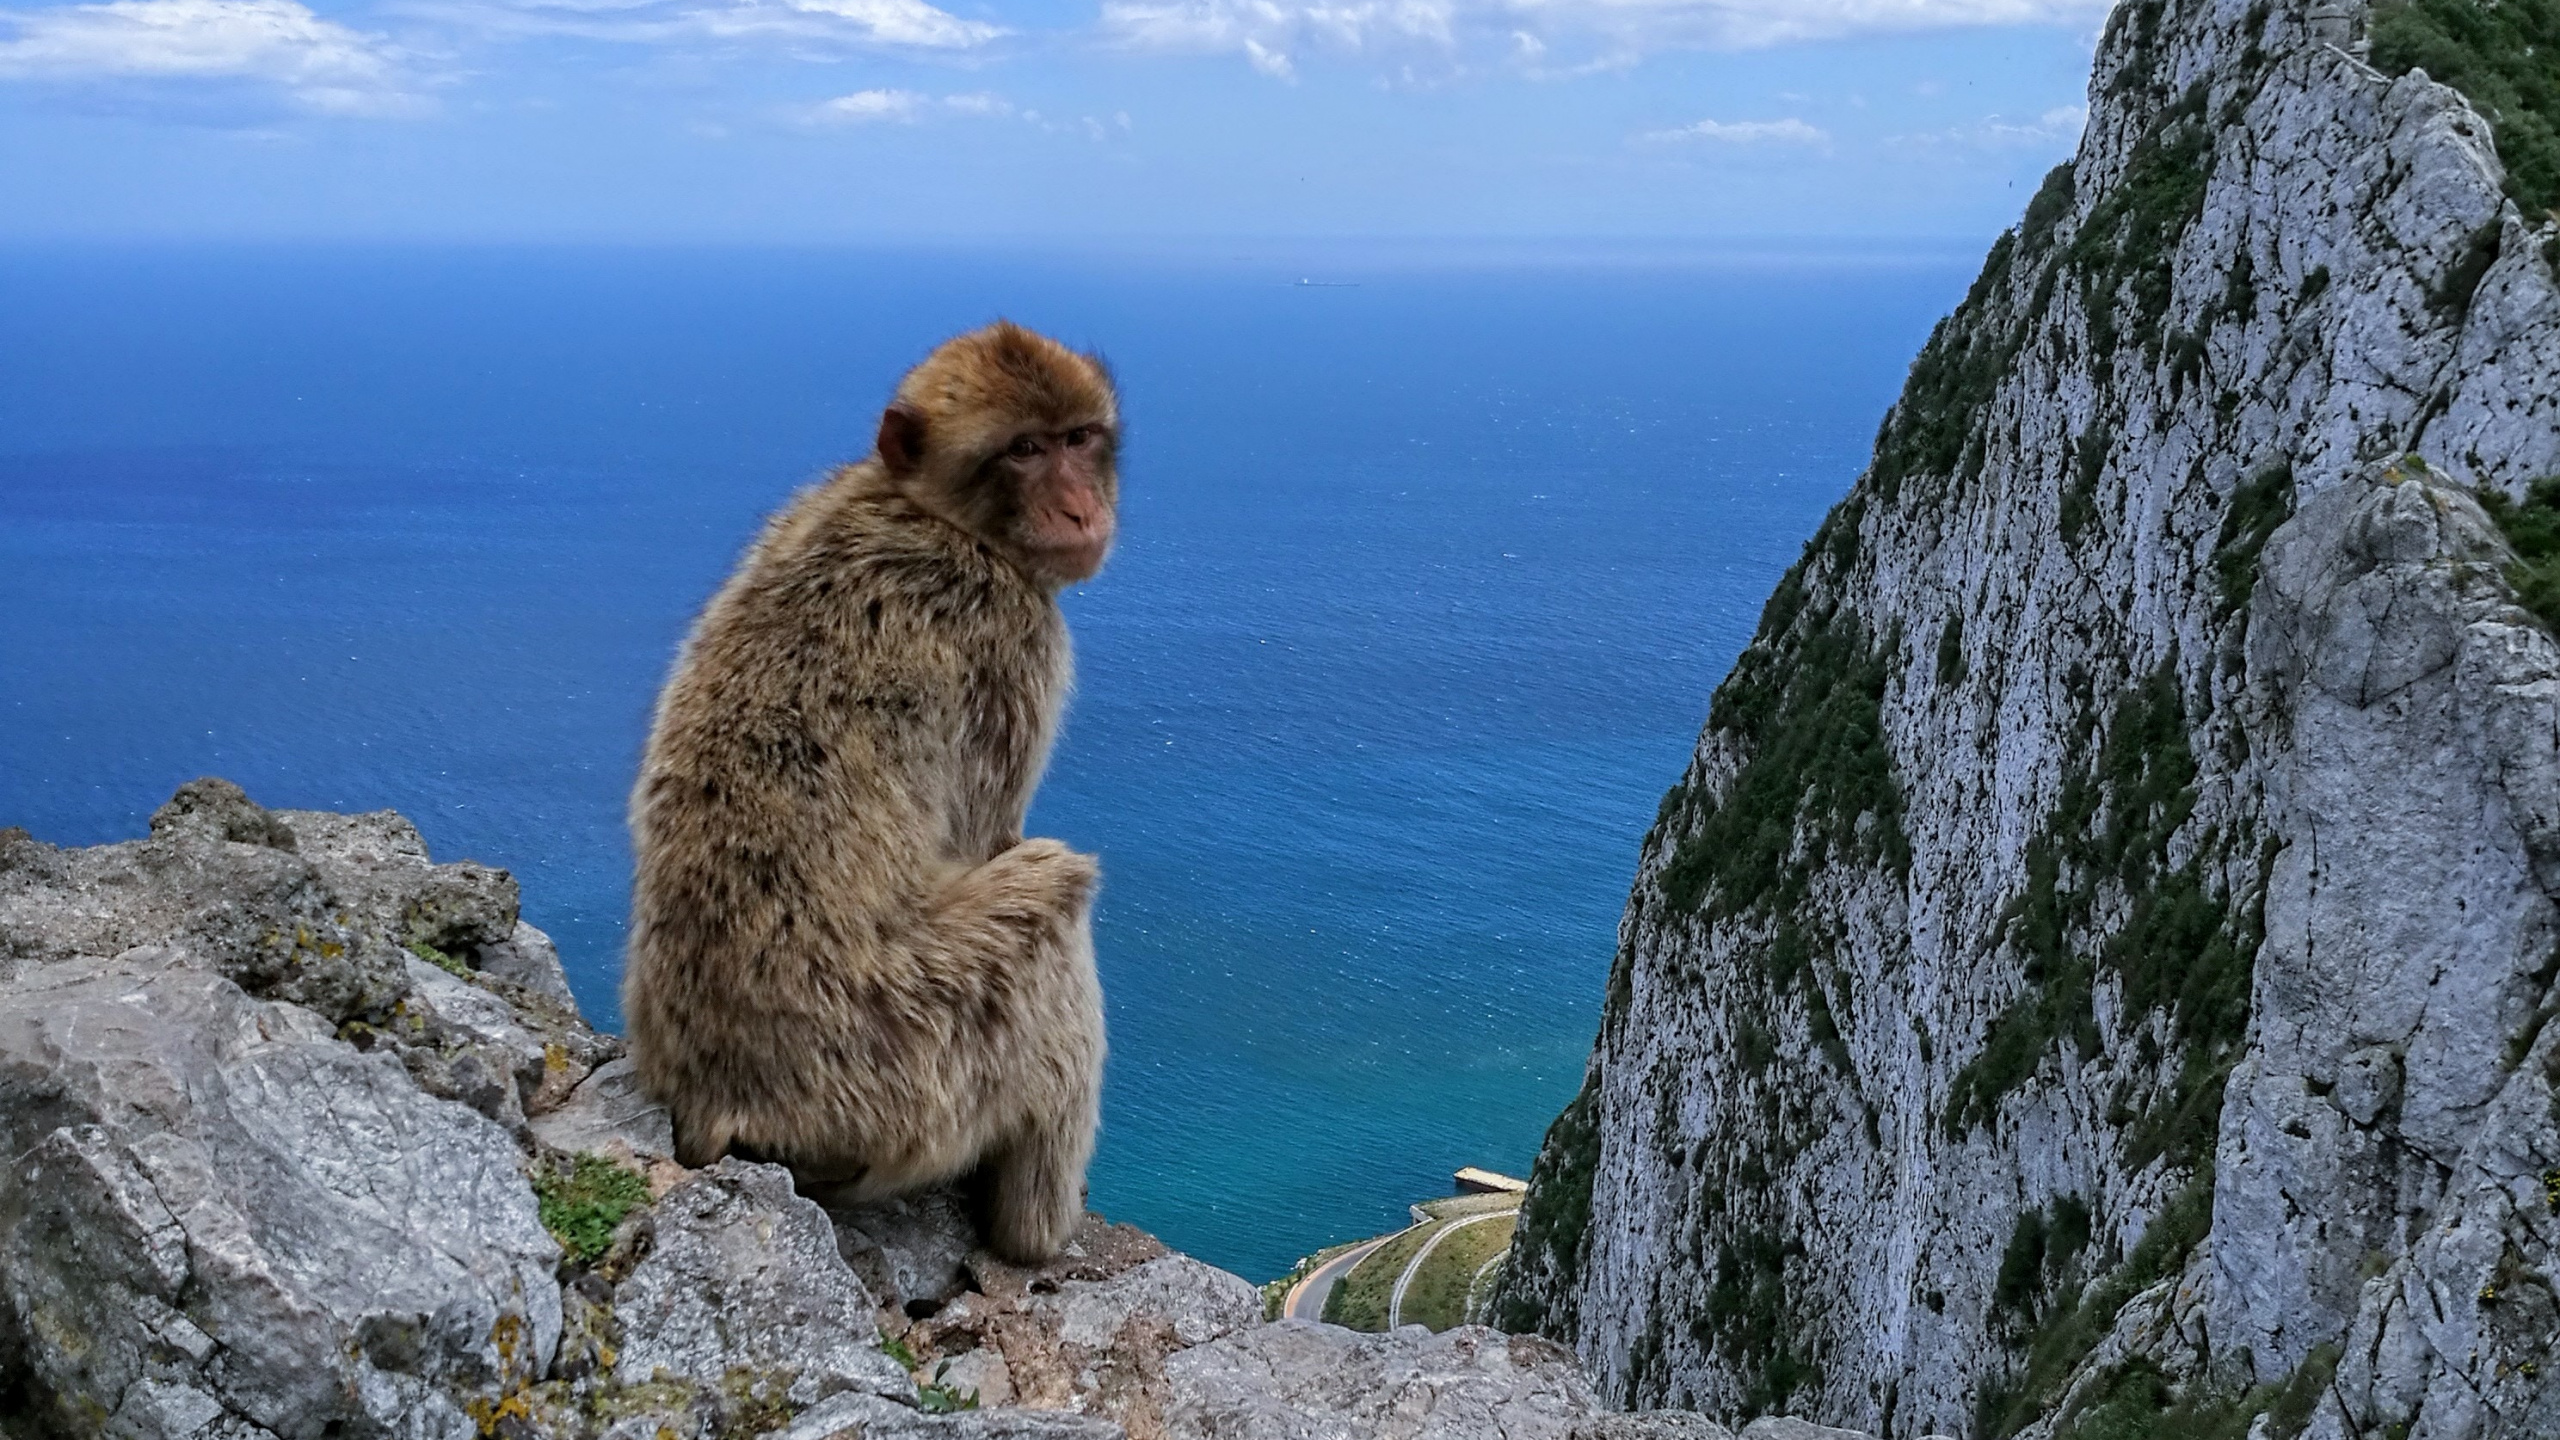 Brown Monkey Sitting on Gray Rock During Daytime. Wallpaper in 2560x1440 Resolution